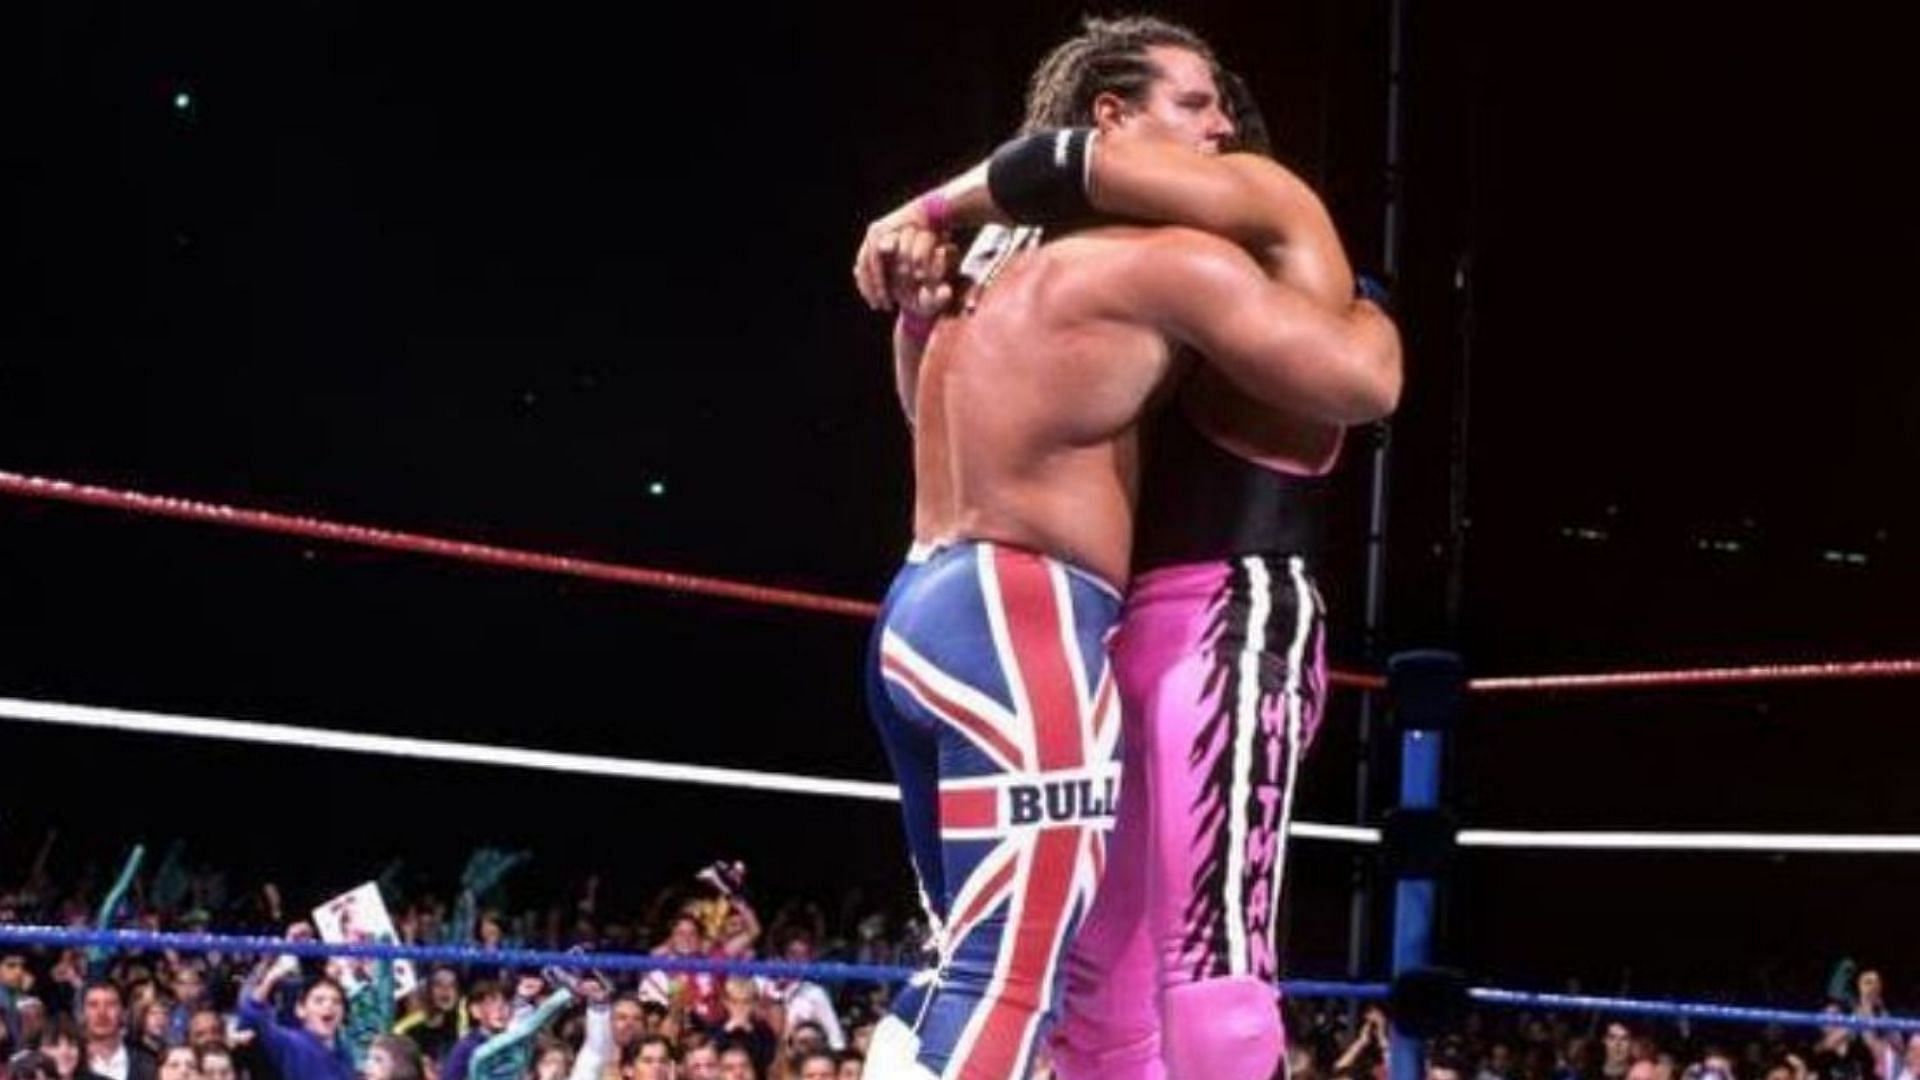 British Bulldog would&#039;ve won the WWE Championship had it not been for his personal problems outside the ring